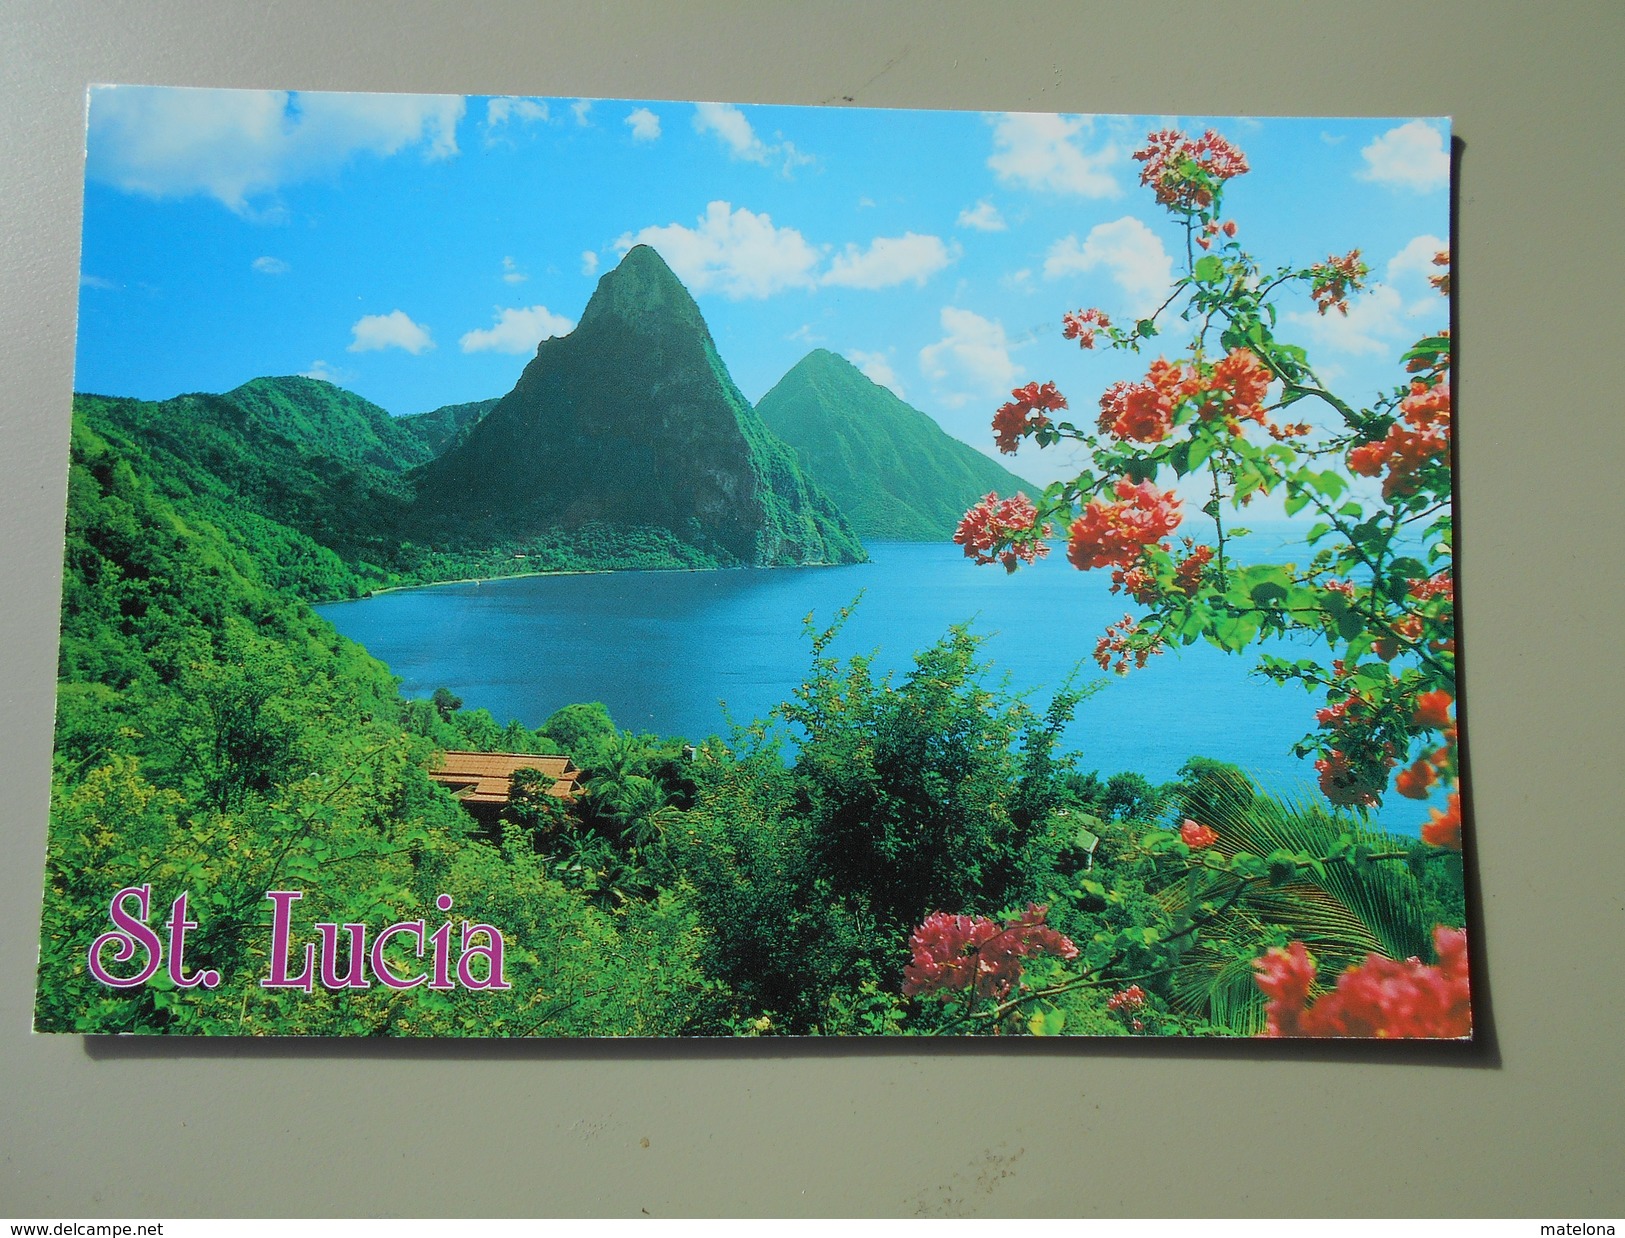 SAINTE LUCIE ST. LUCIA THE PITONS TWIN PEAKS RISING A HALF MILE OUT OF THE OCEAN.............. - Santa Lucía